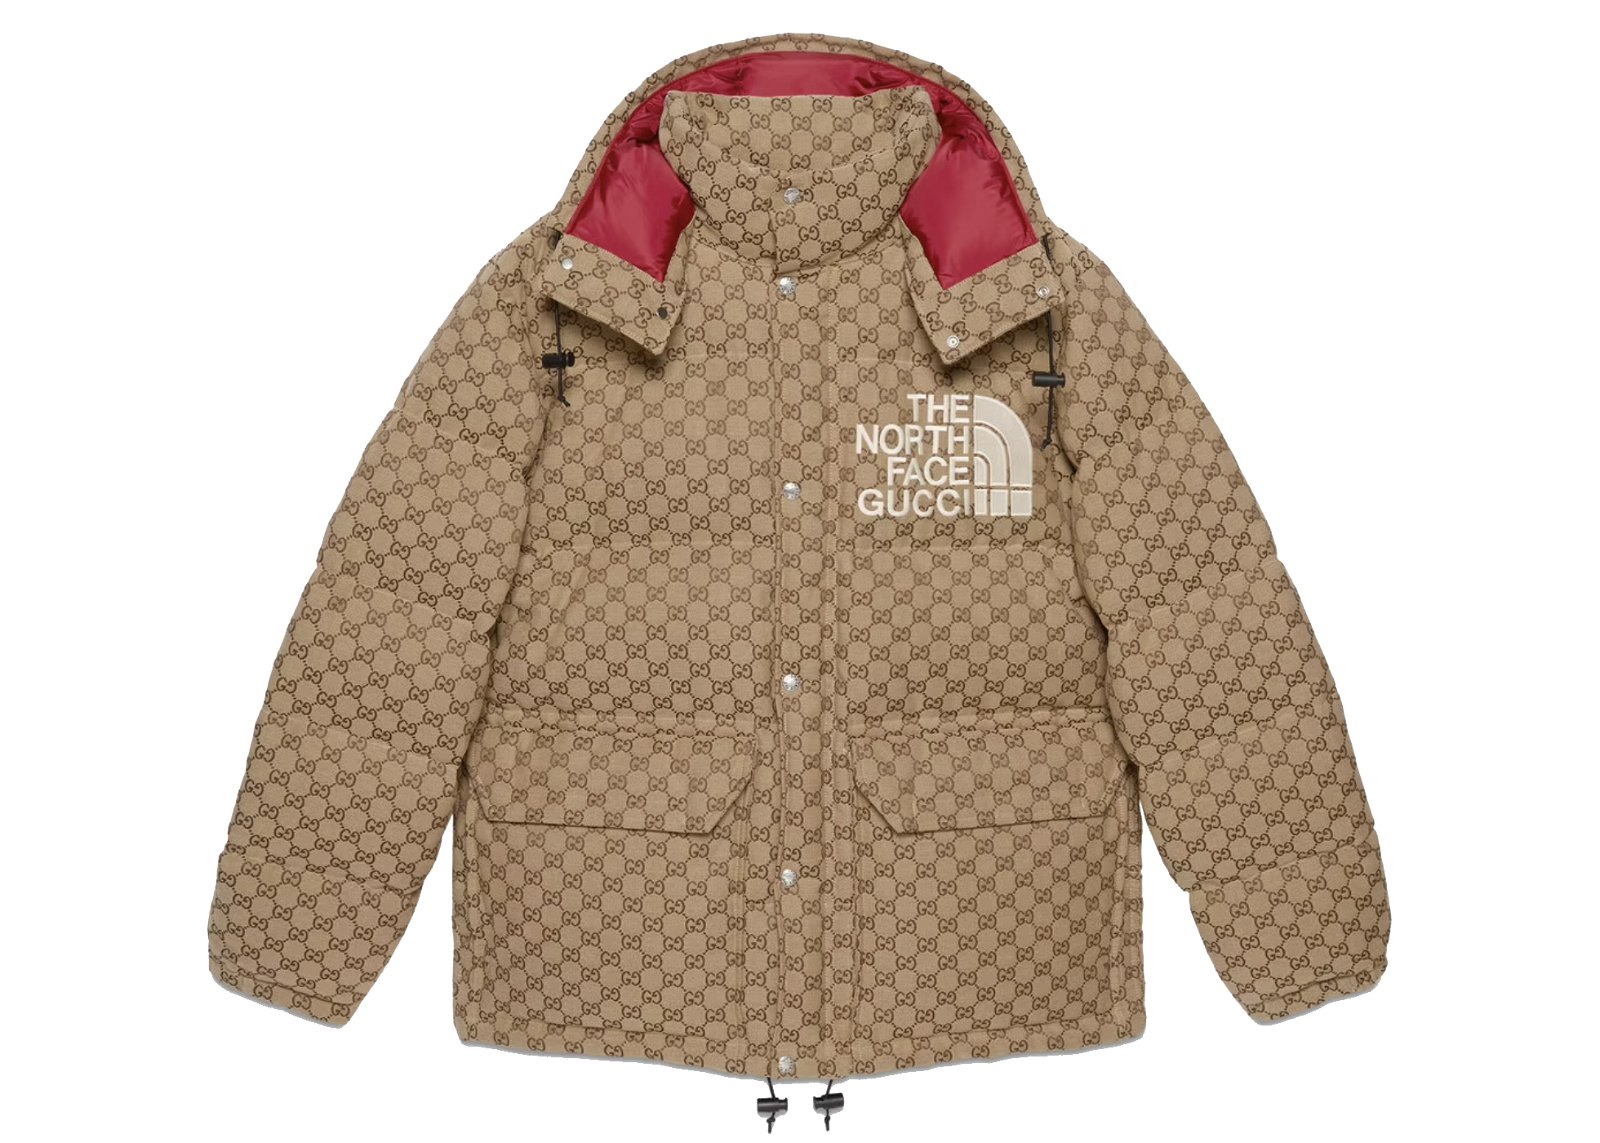 Gucci x The North Face Padded Jacket Beige/Ebony sneakers